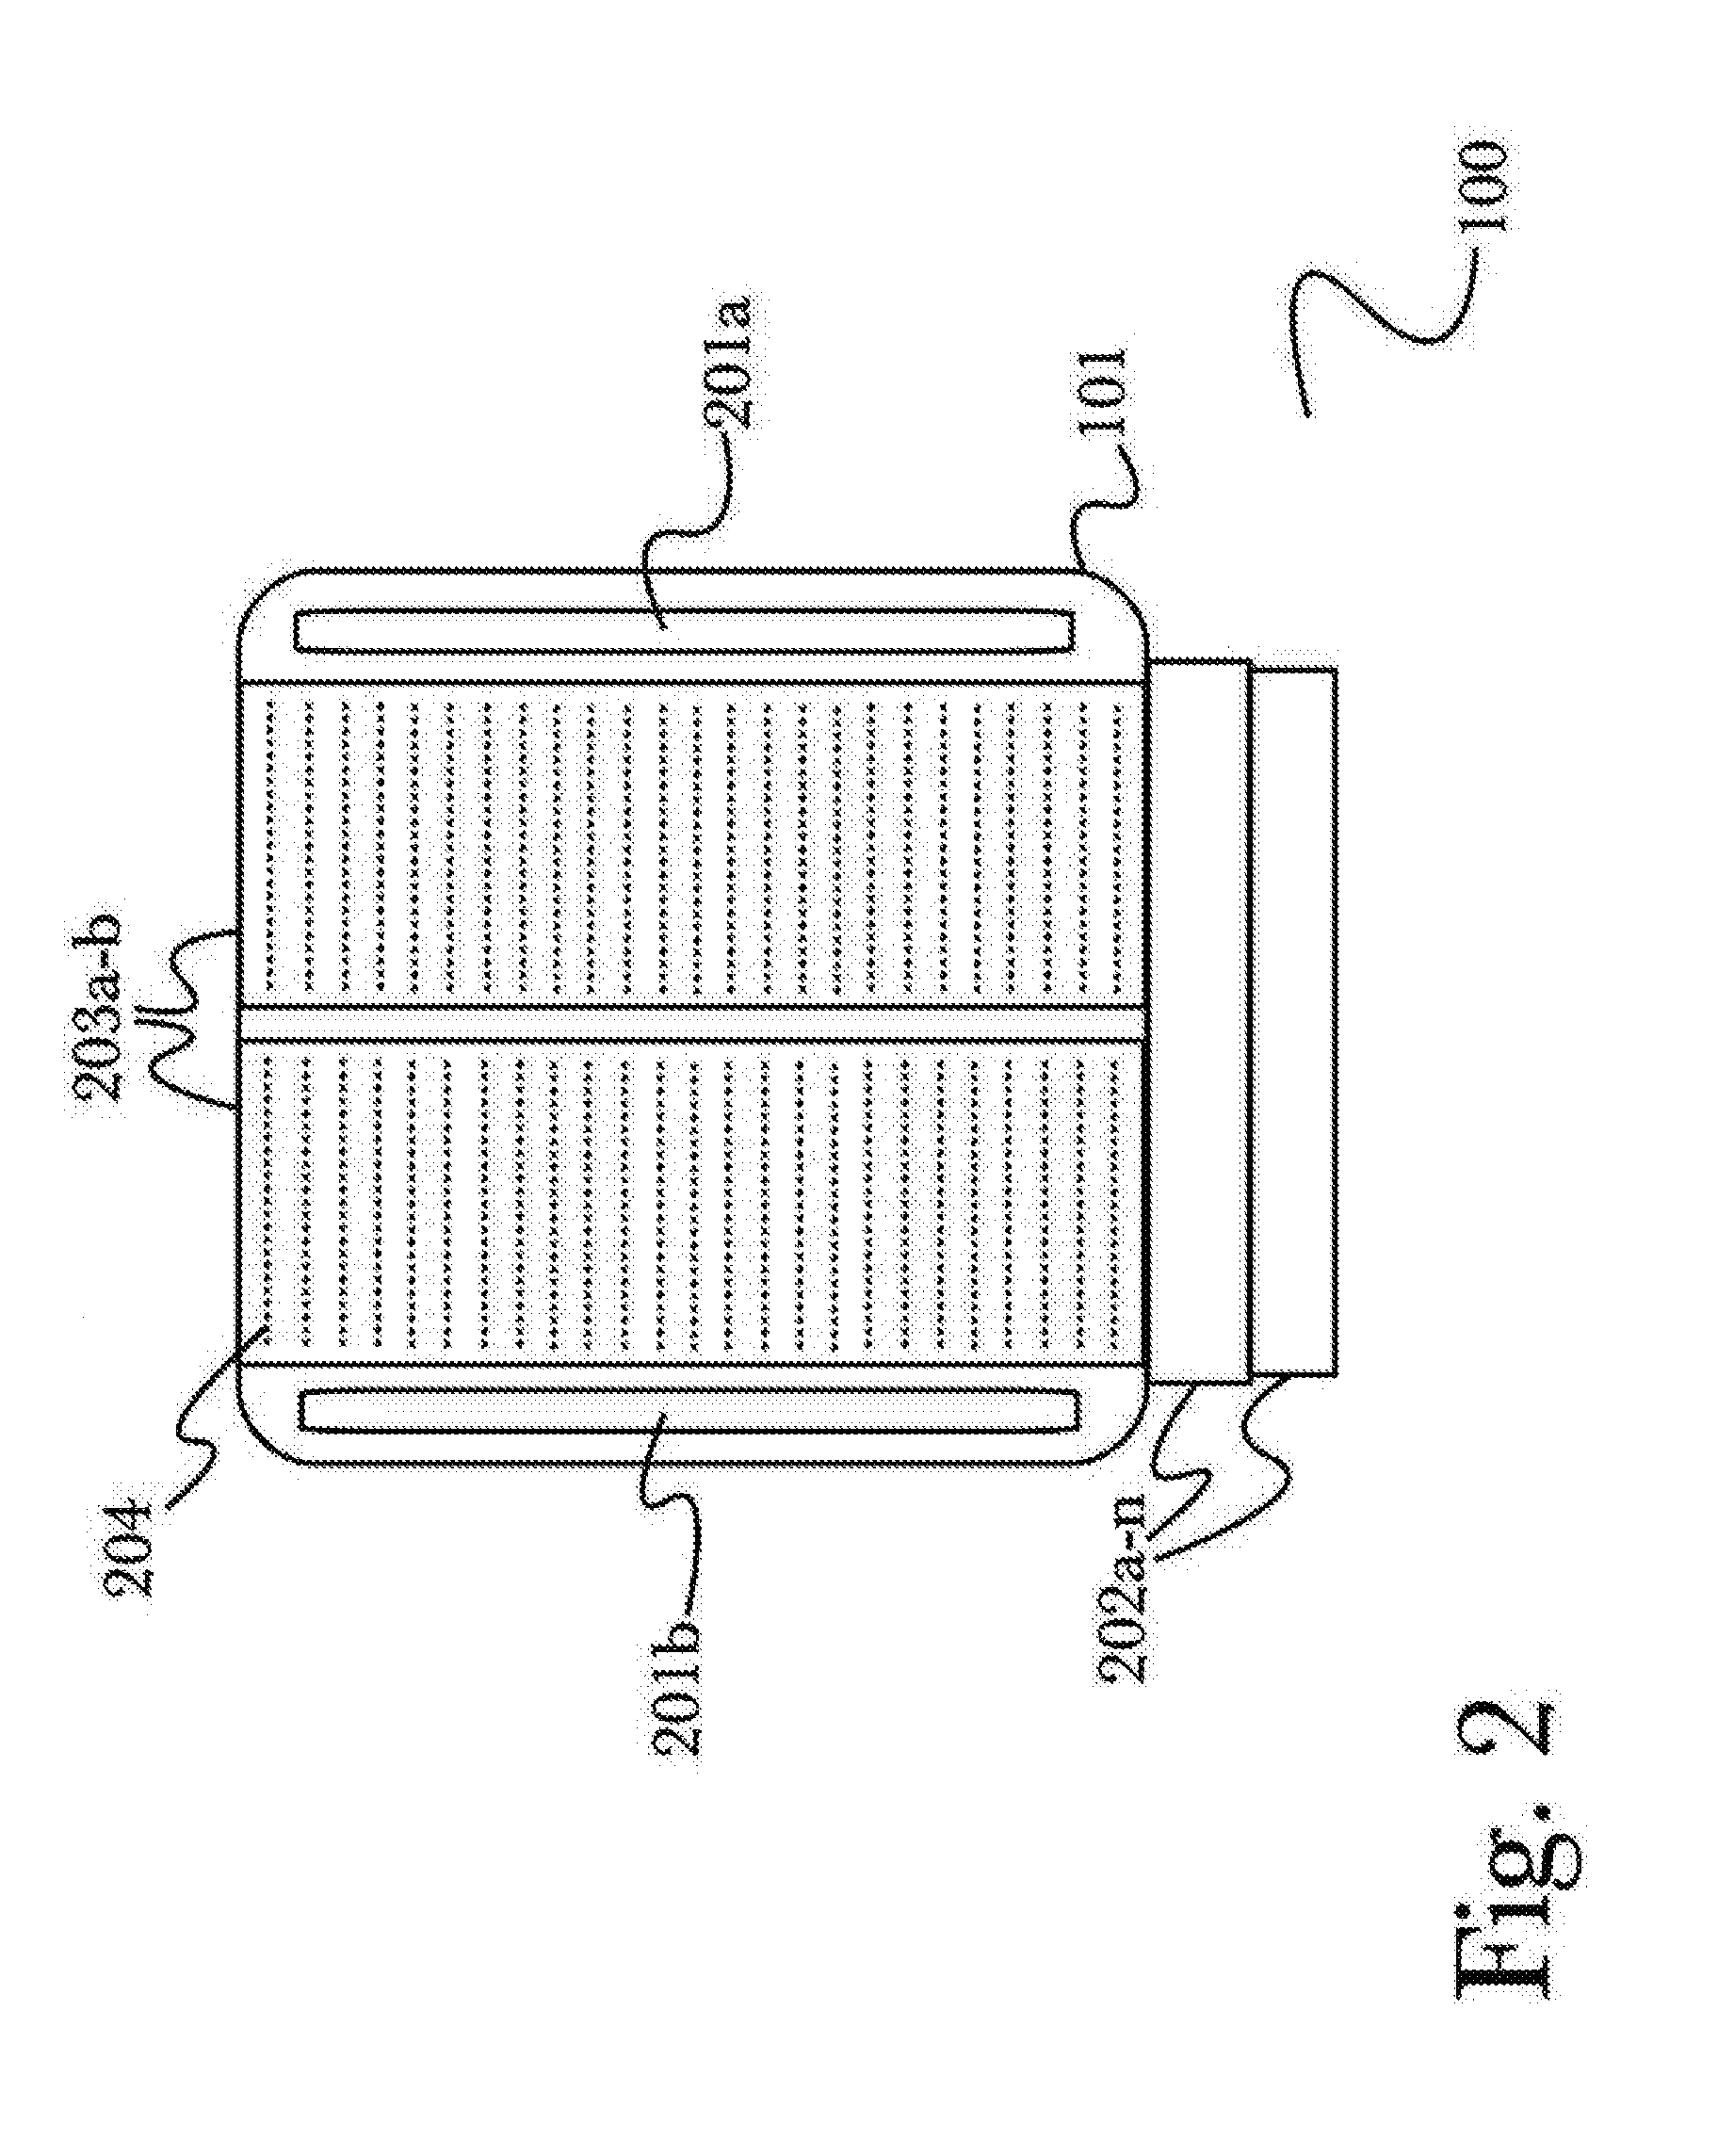 Variable-resistance exercise machine with wireless communication for smart device control and interactive software applications